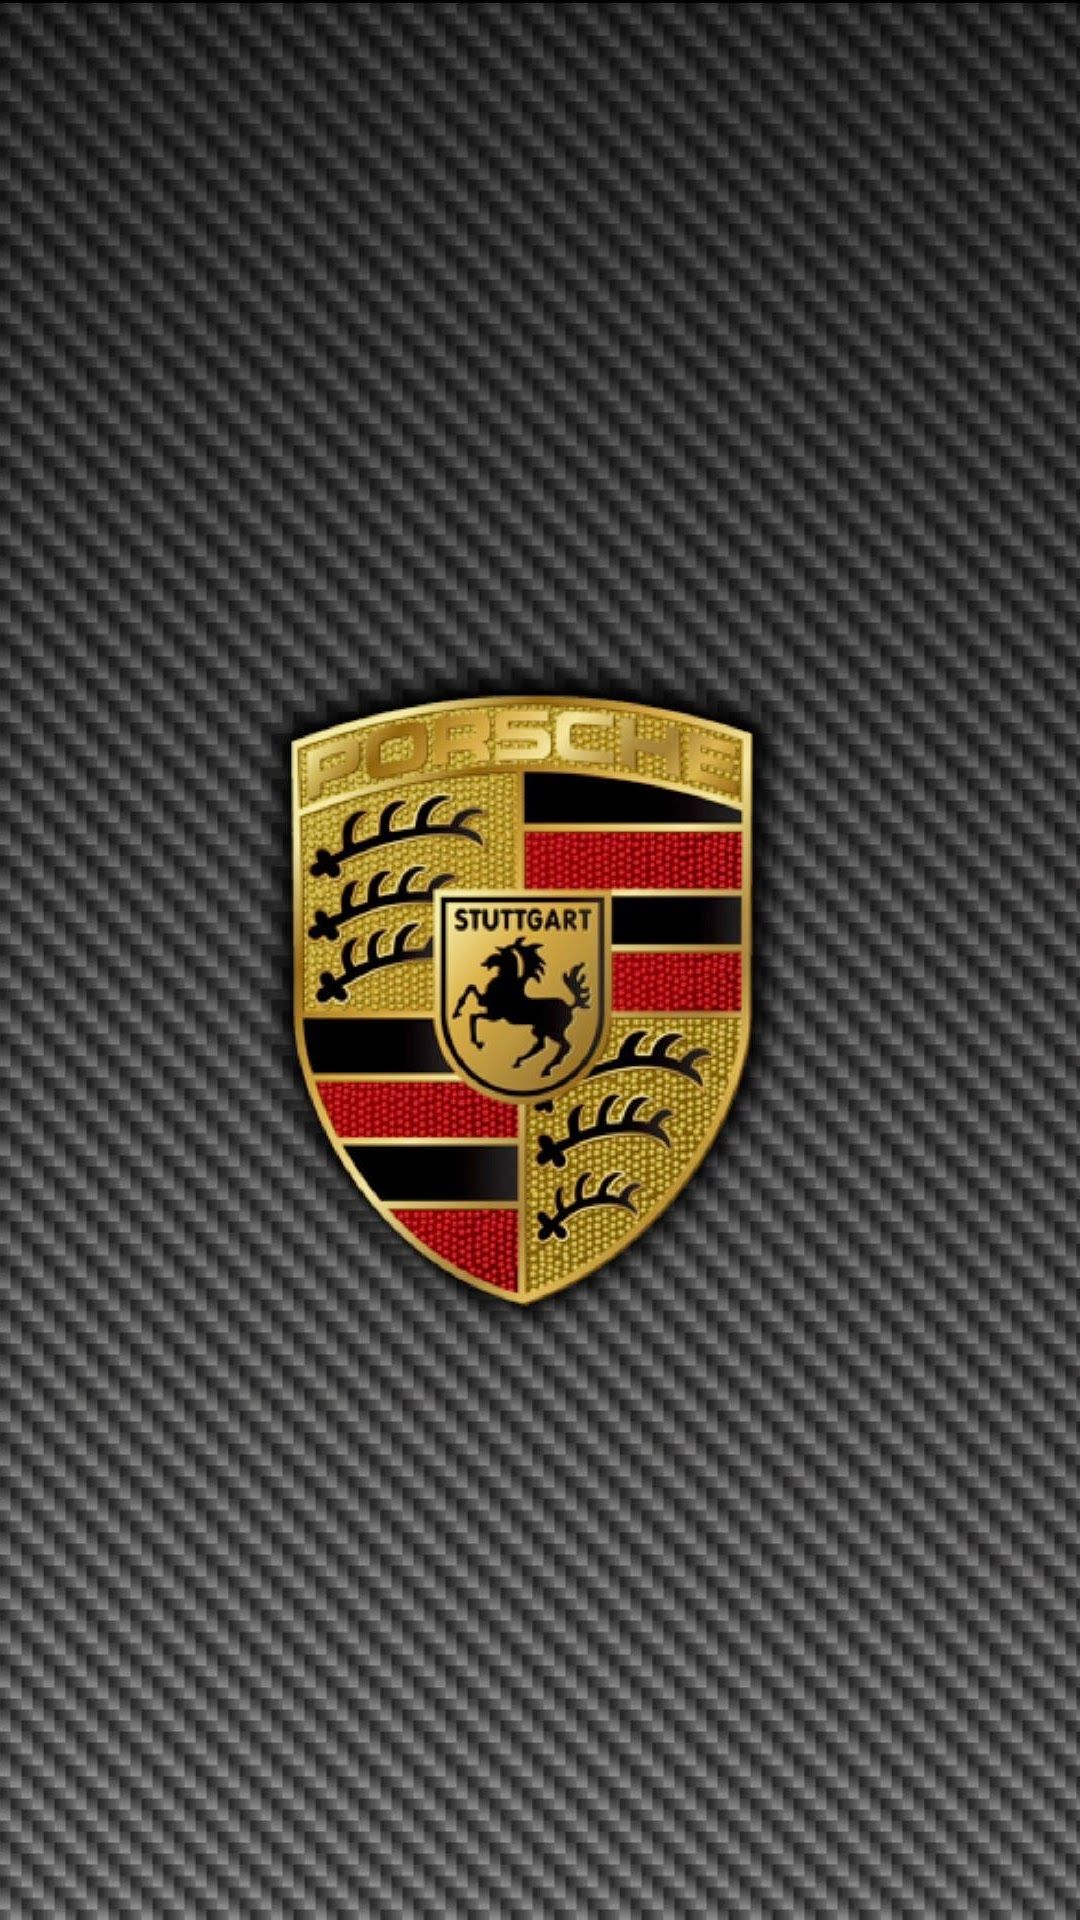 New Android Wallpaper: Porsche Logo Grey Background Android Wallpaper